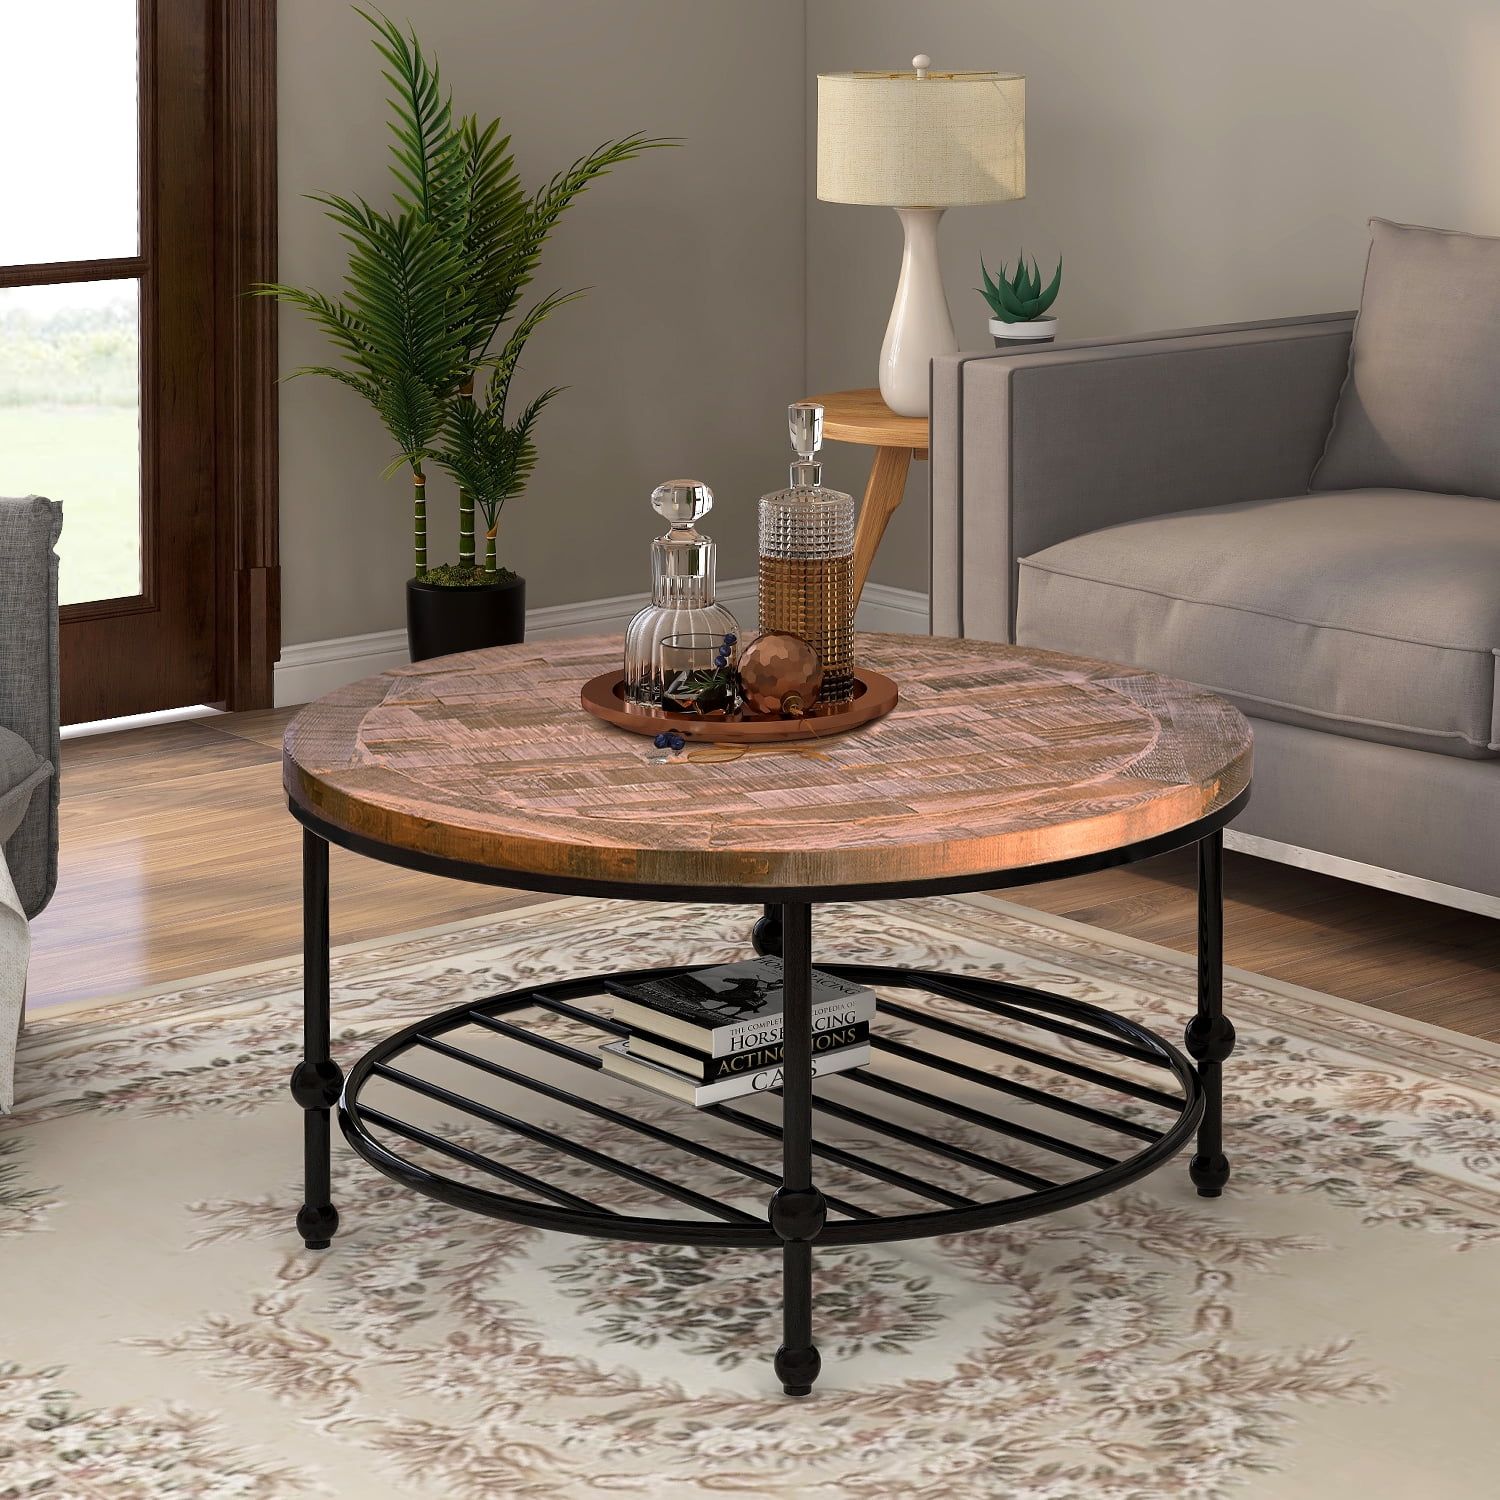 Rustic Natural Round Coffee Table With Storage Shelf For Living Room With Round Coffee Tables With Storage (Gallery 4 of 20)